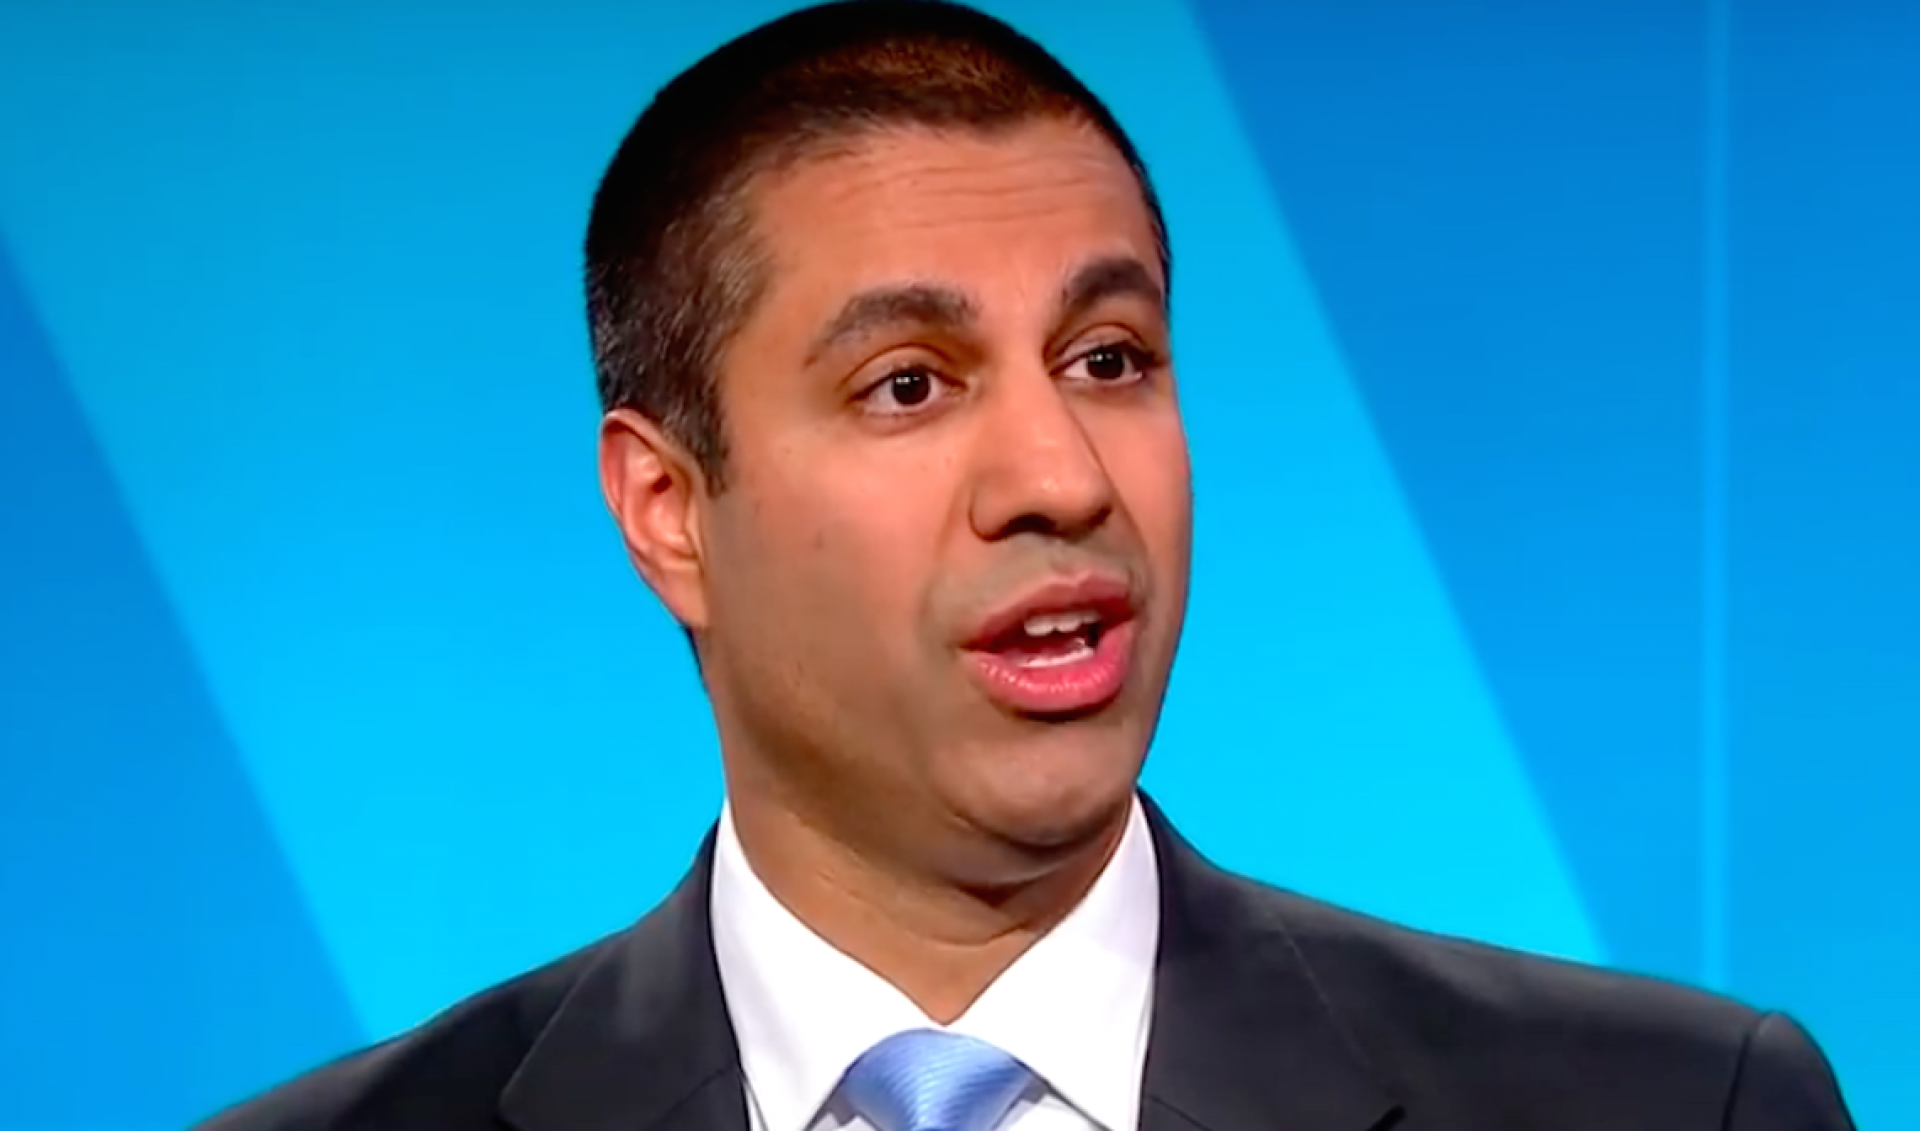 You Can Watch The FCC ‘Net Neutrality’ Debate And Vote Live